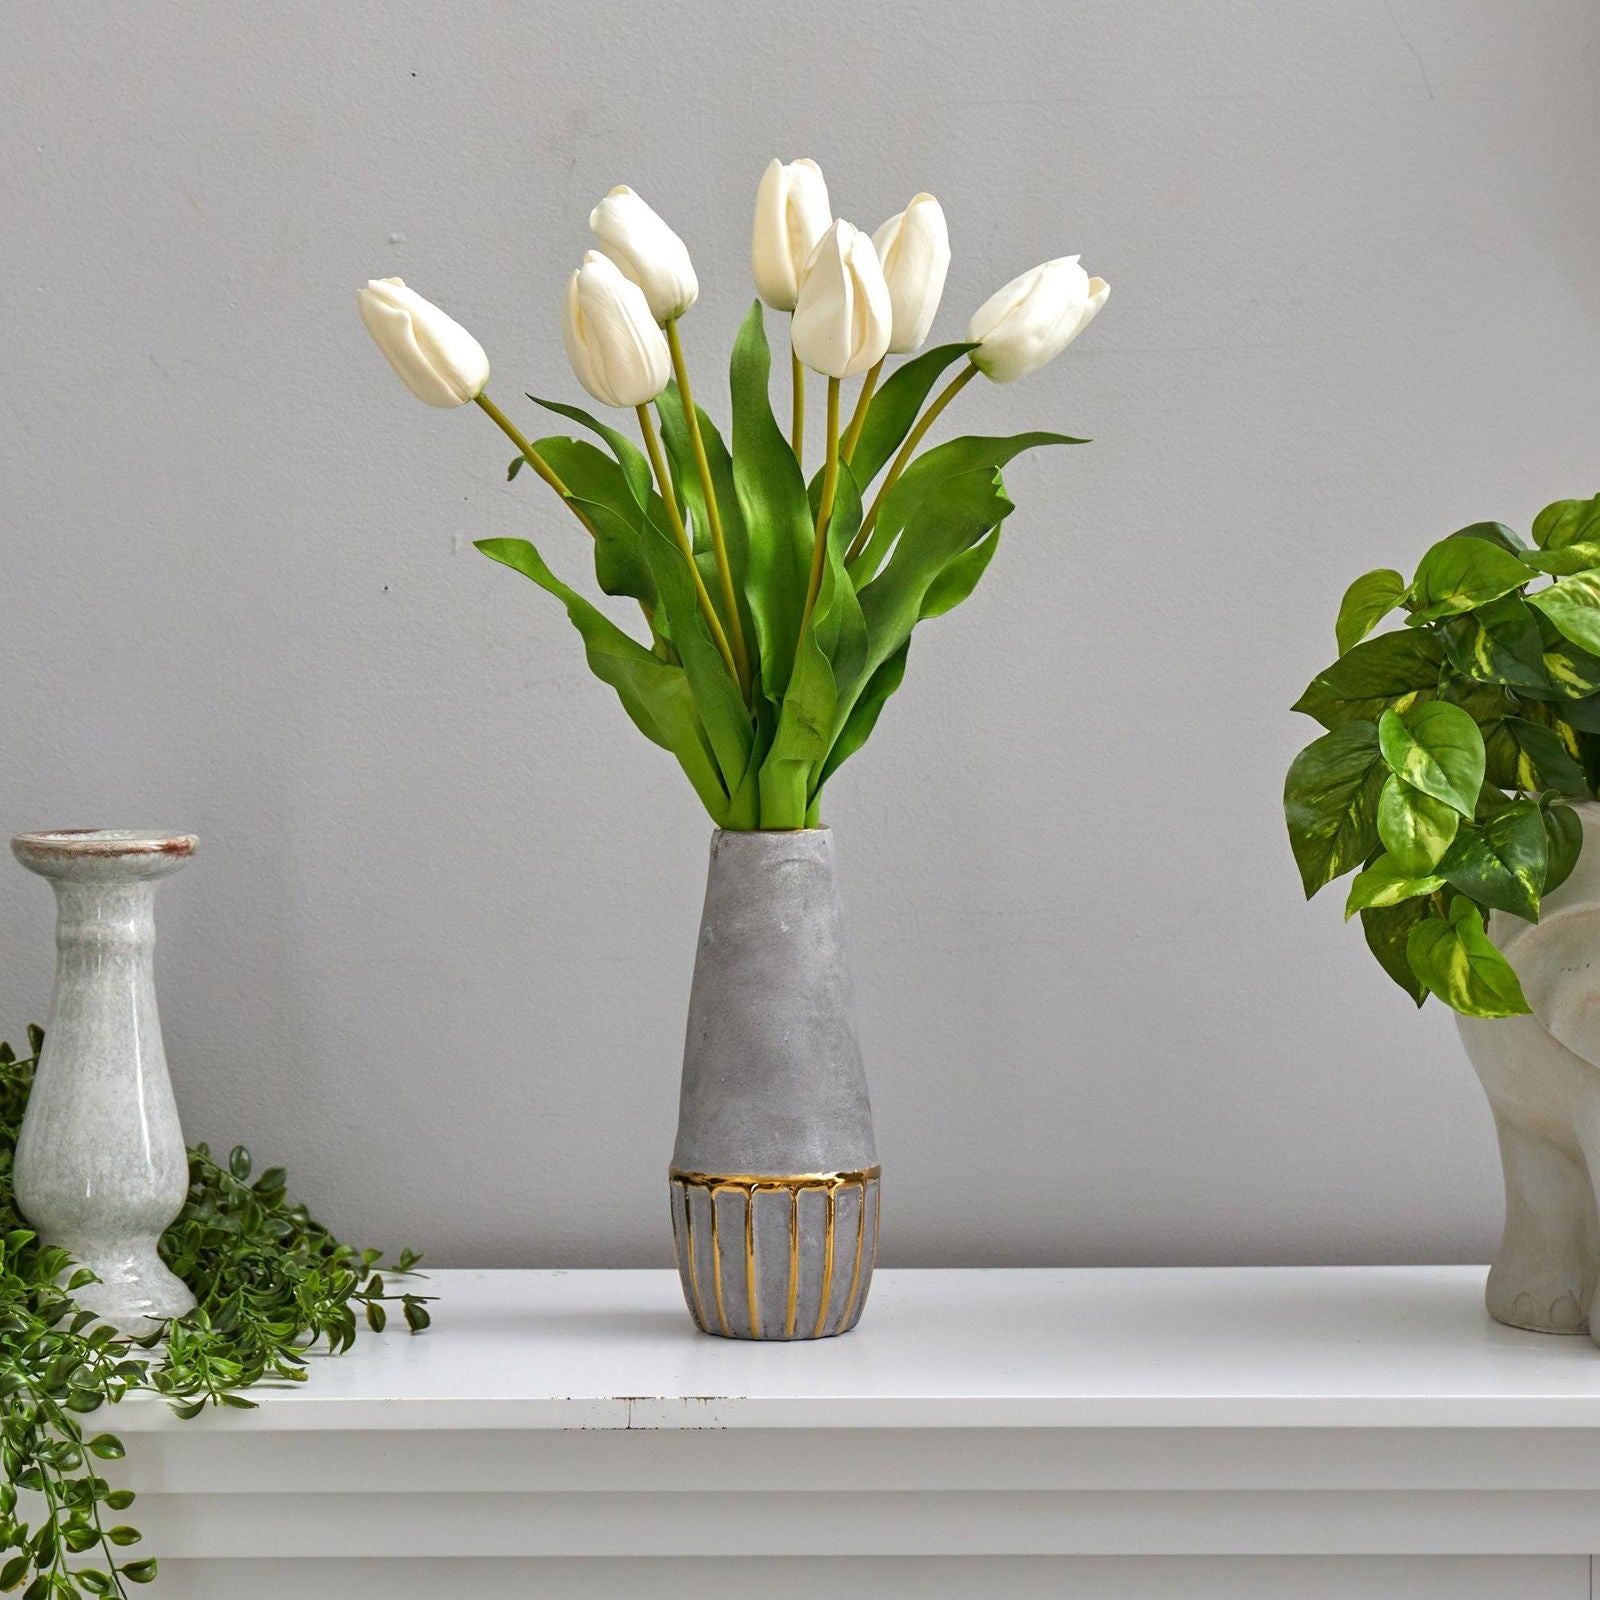 22” Dutch Tulip Artificial Arrangement in Stoneware Vase with Gold Trimming - Rivour Home